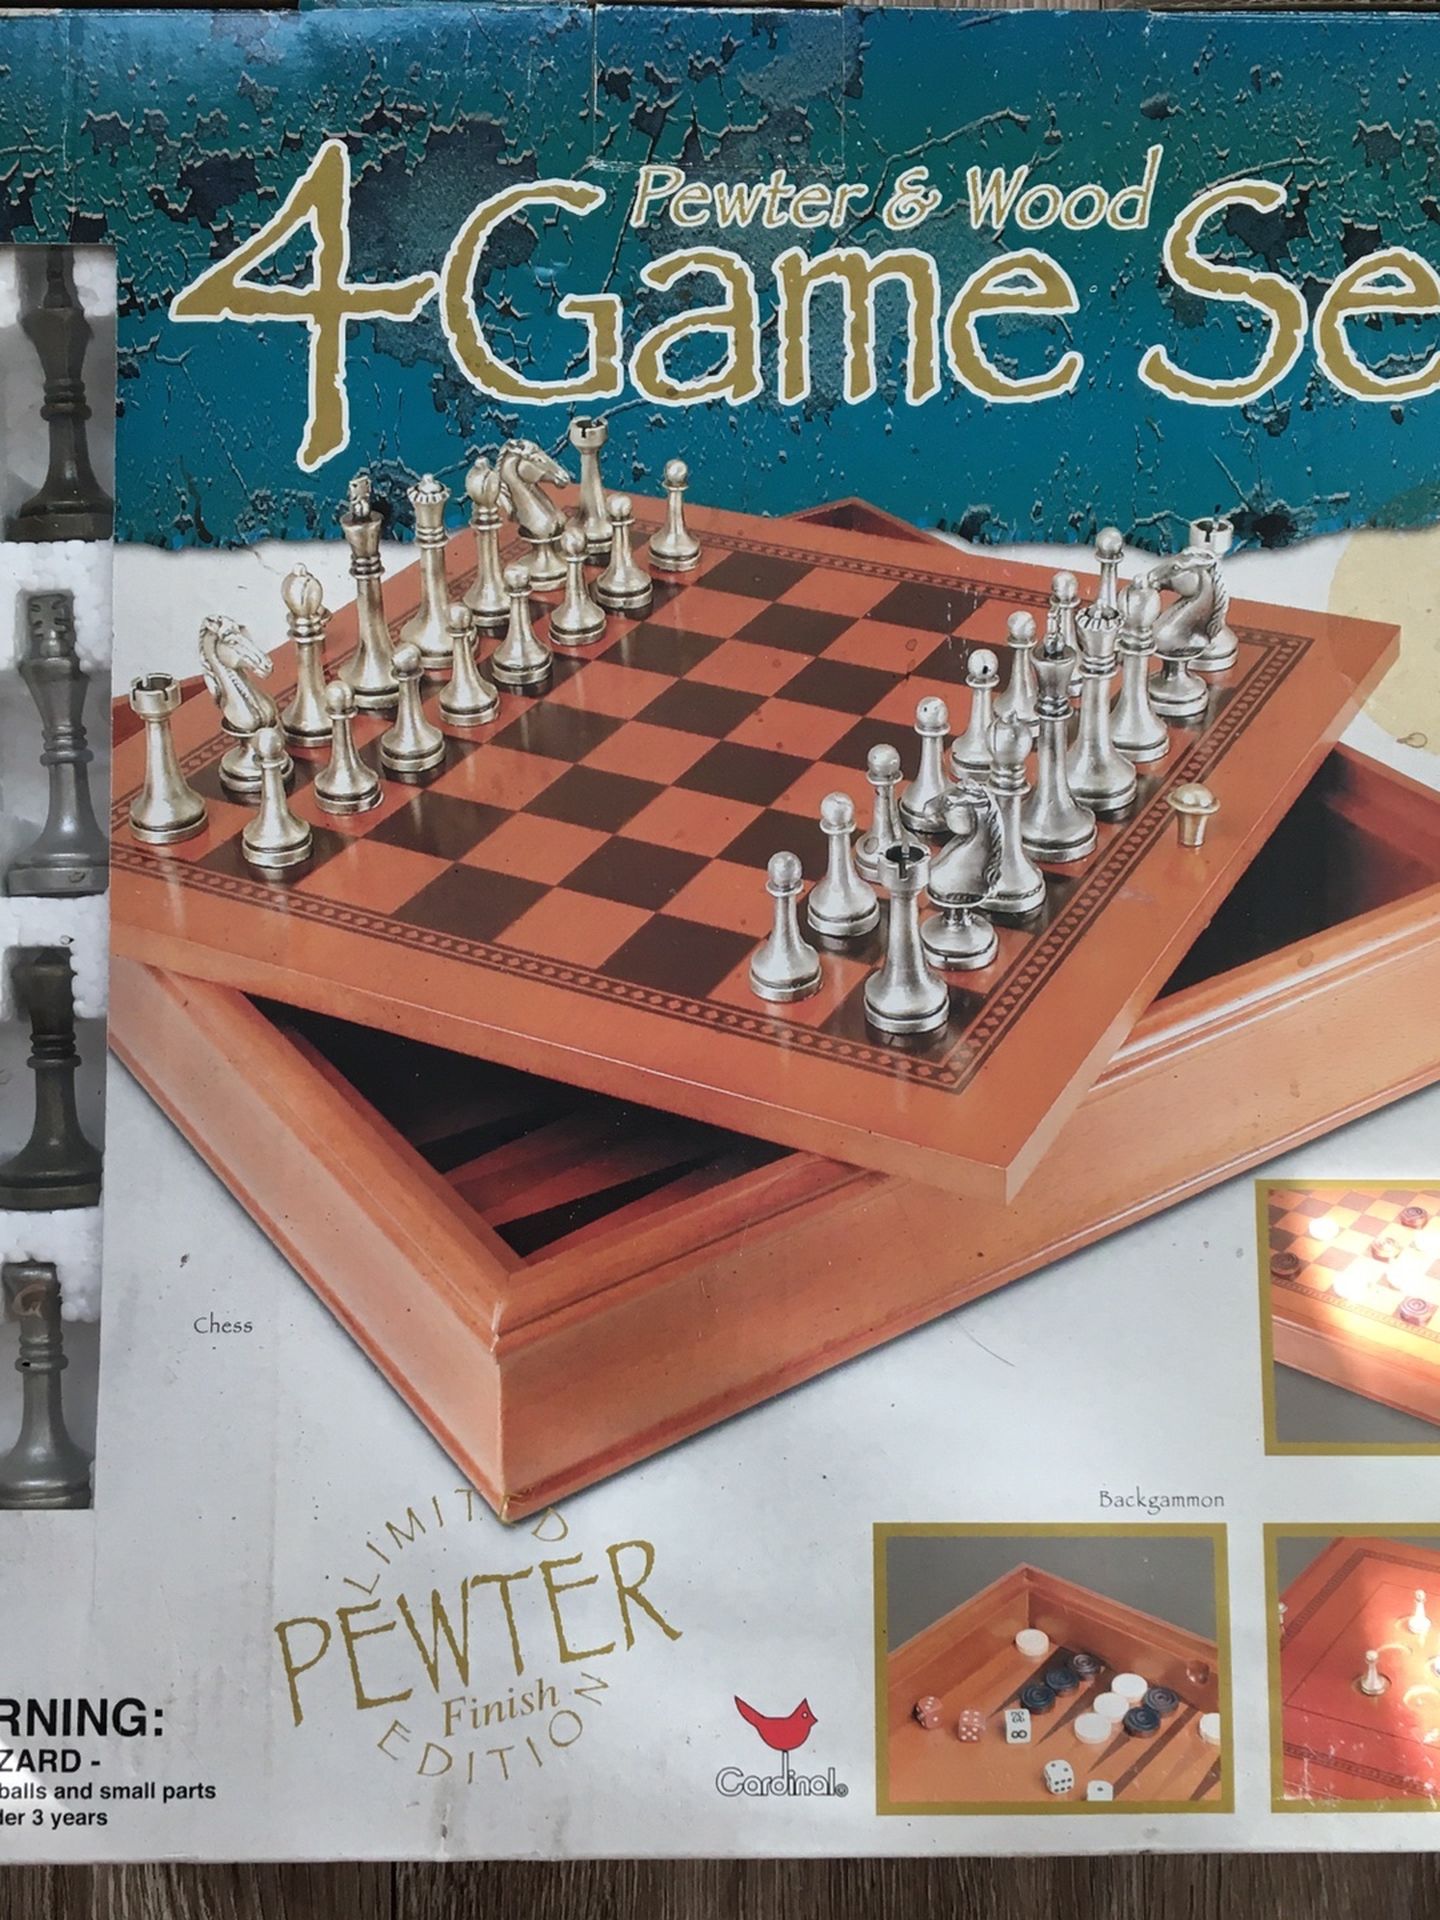 Pewter & Wood 4 Game Set (Chess, Checkers, Backgammon, Tic Tac Toe)